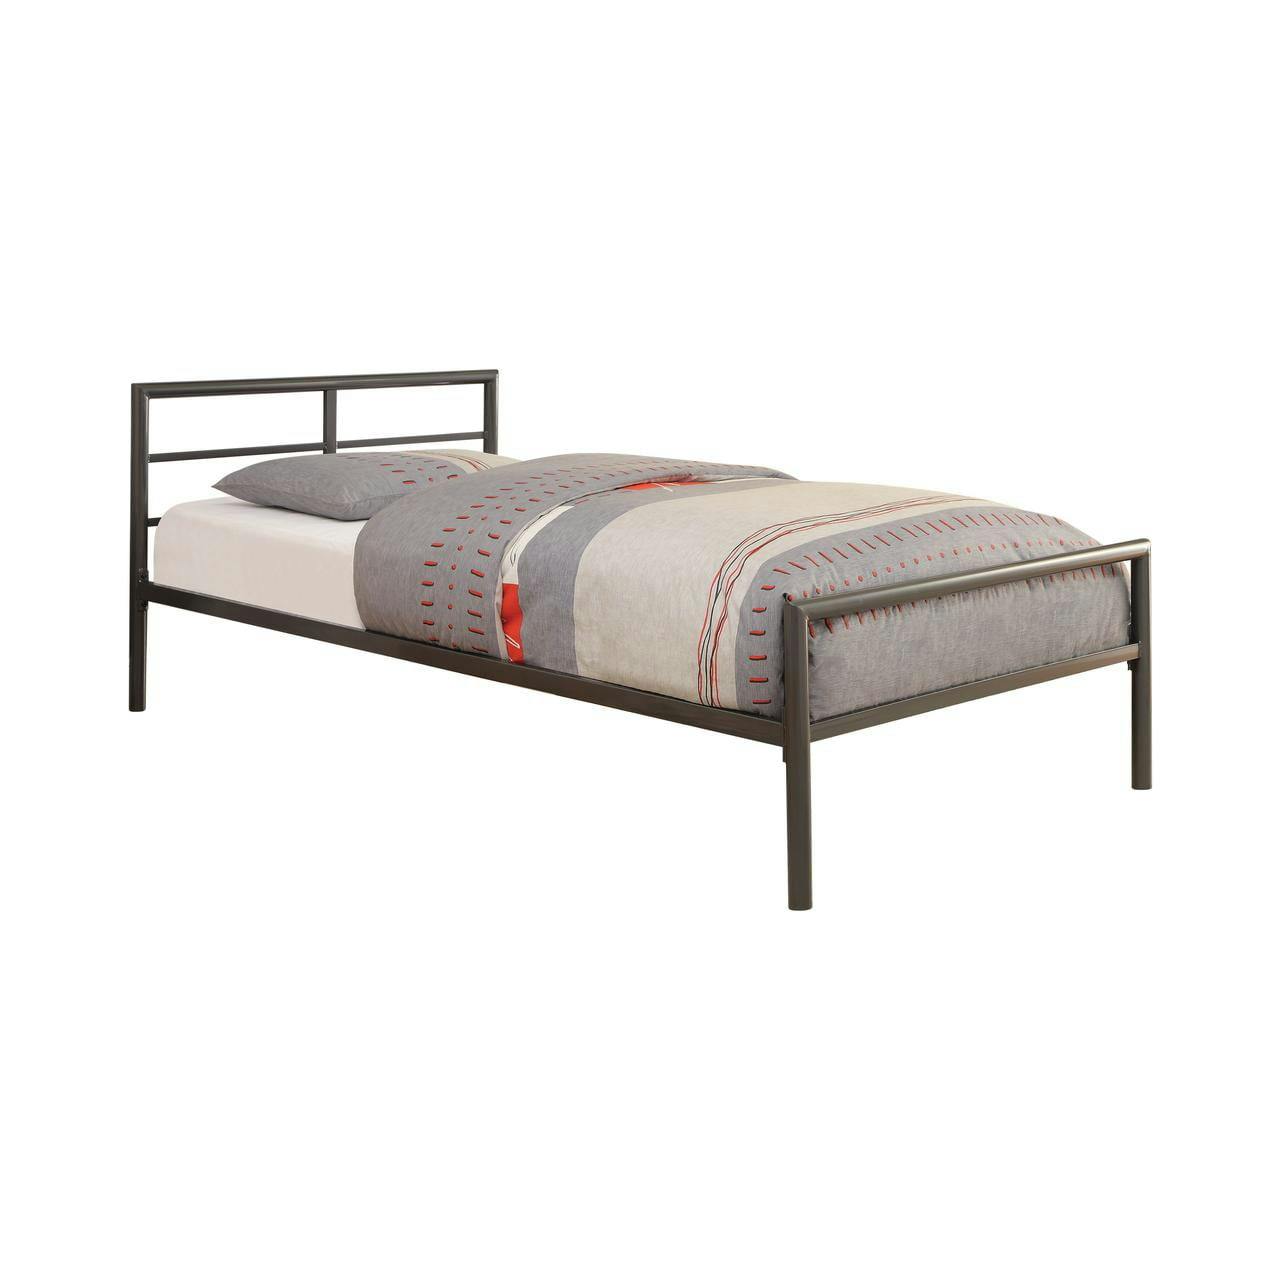 Contemporary Twin Metal Bed with Faux Leather Headboard in Gunmetal Gray